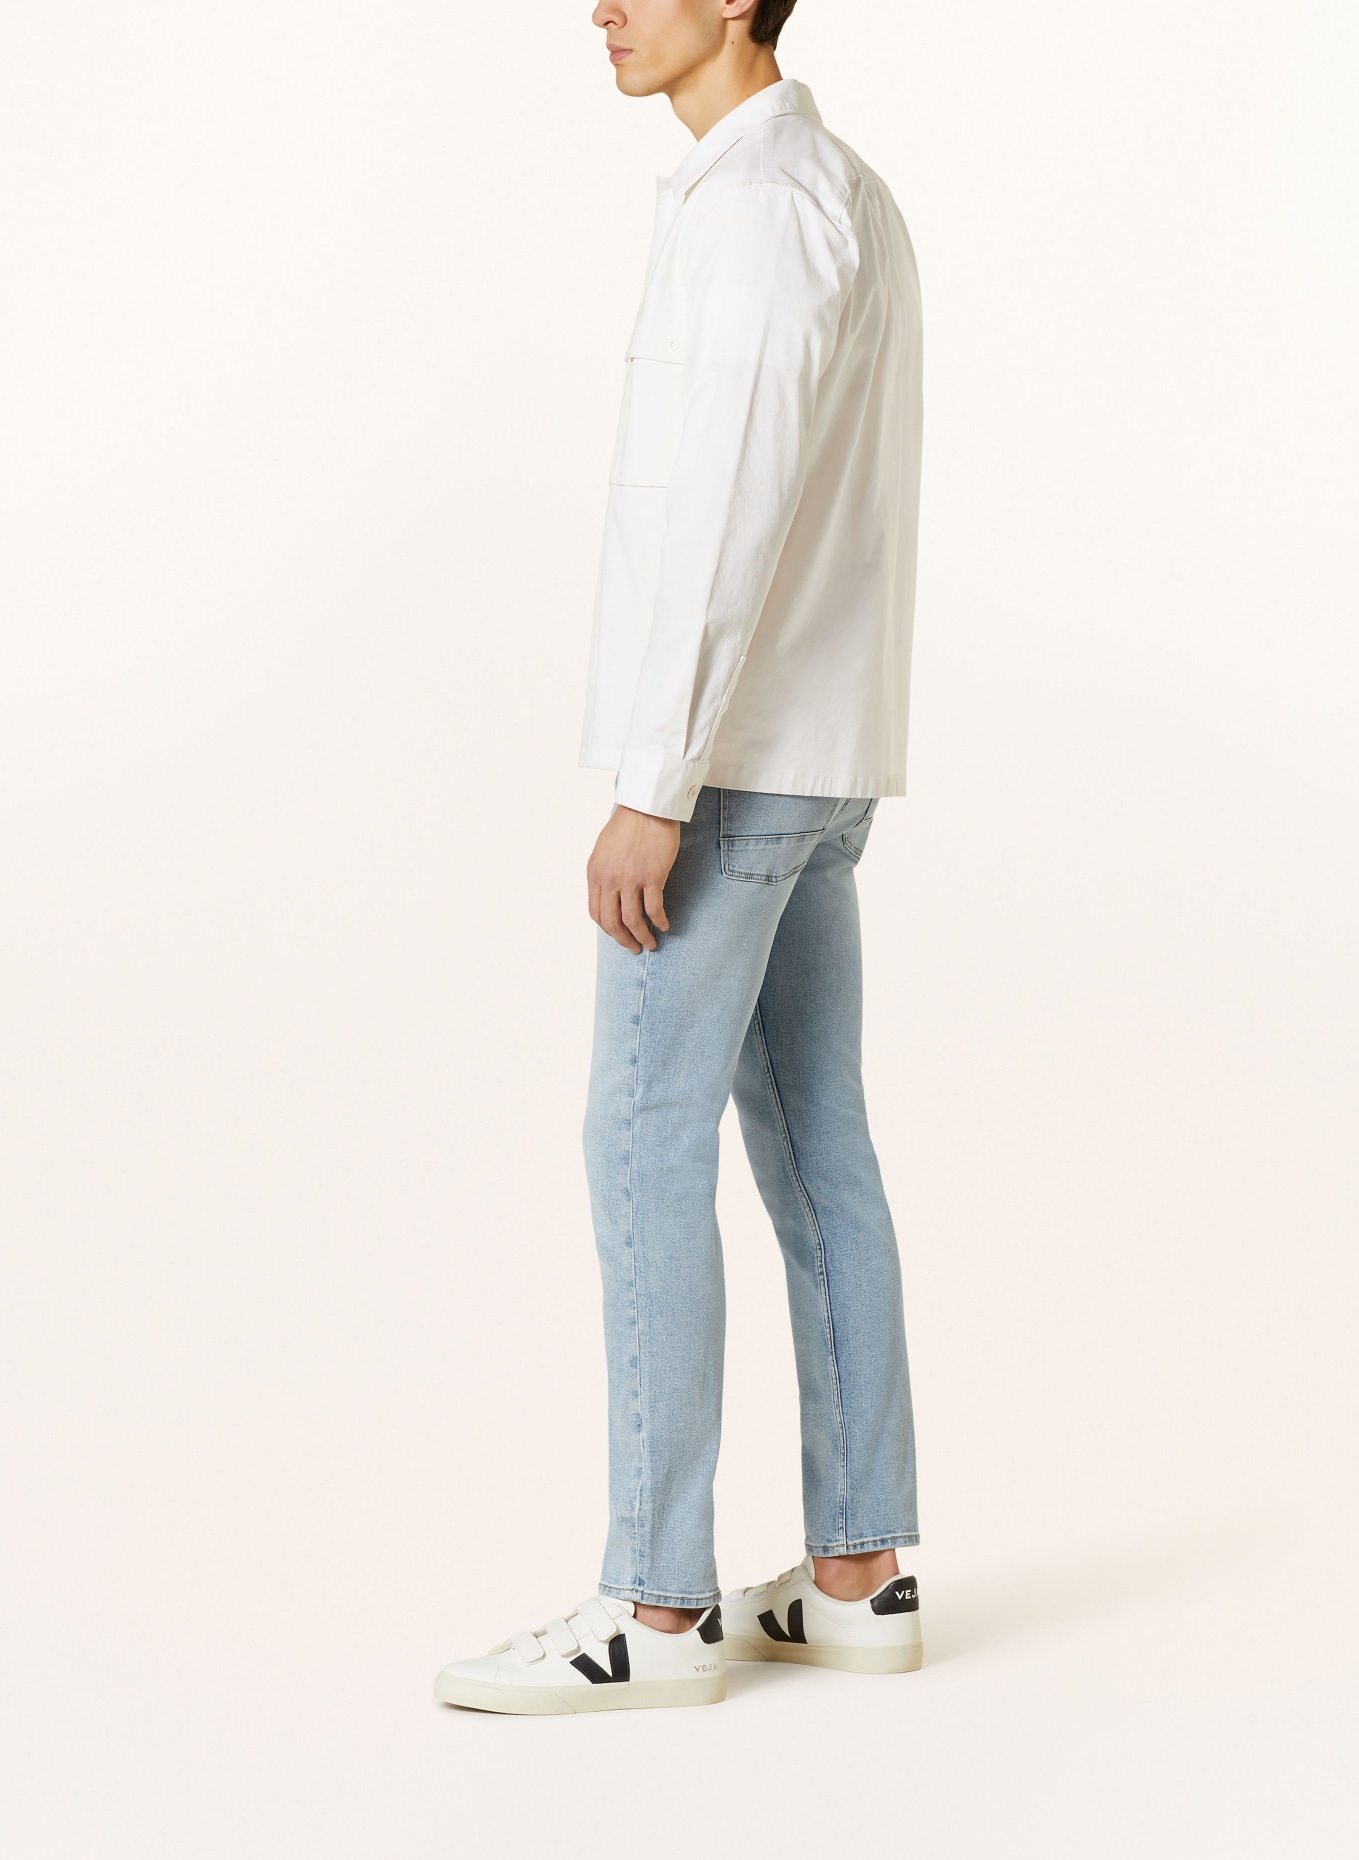 Marc O'Polo Jeans shaped fit, Color: 022 Light blue wash (Image 4)